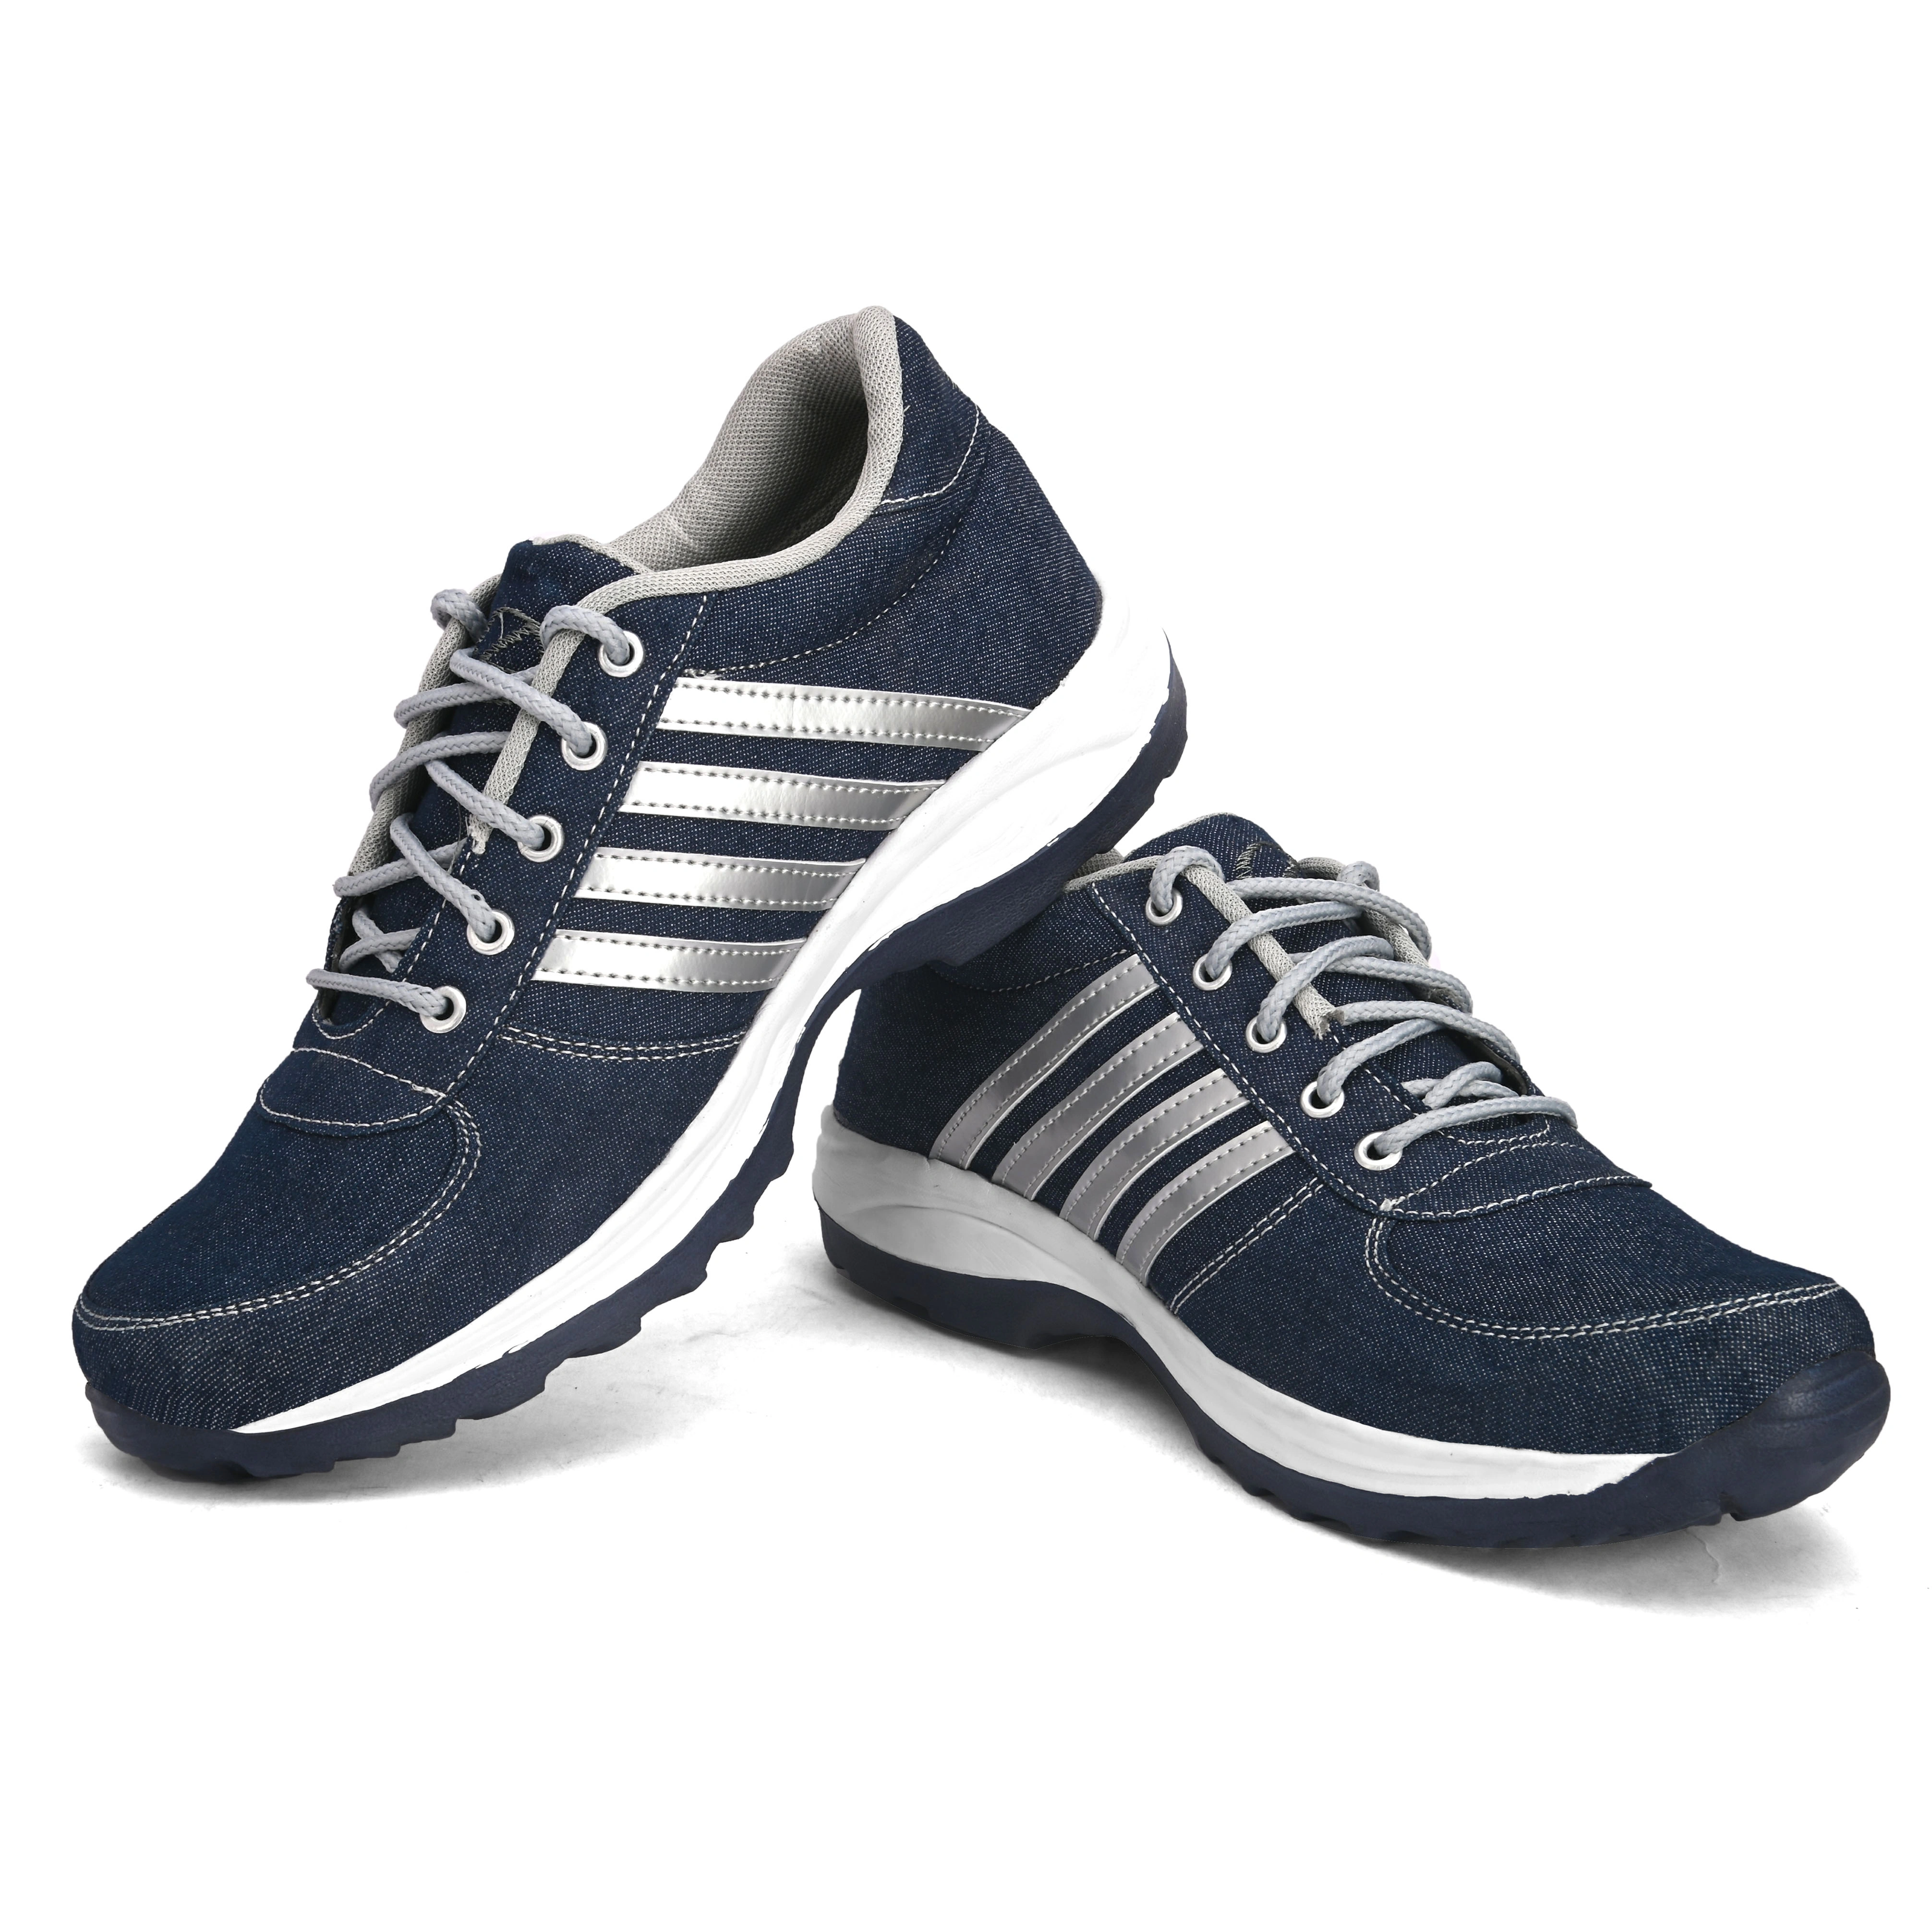 Men's Sports Shoes for Running / Jogging / Walking / Gymnasium (Denim Blue) Shoe For Every Sport By Applause Collection-6-1